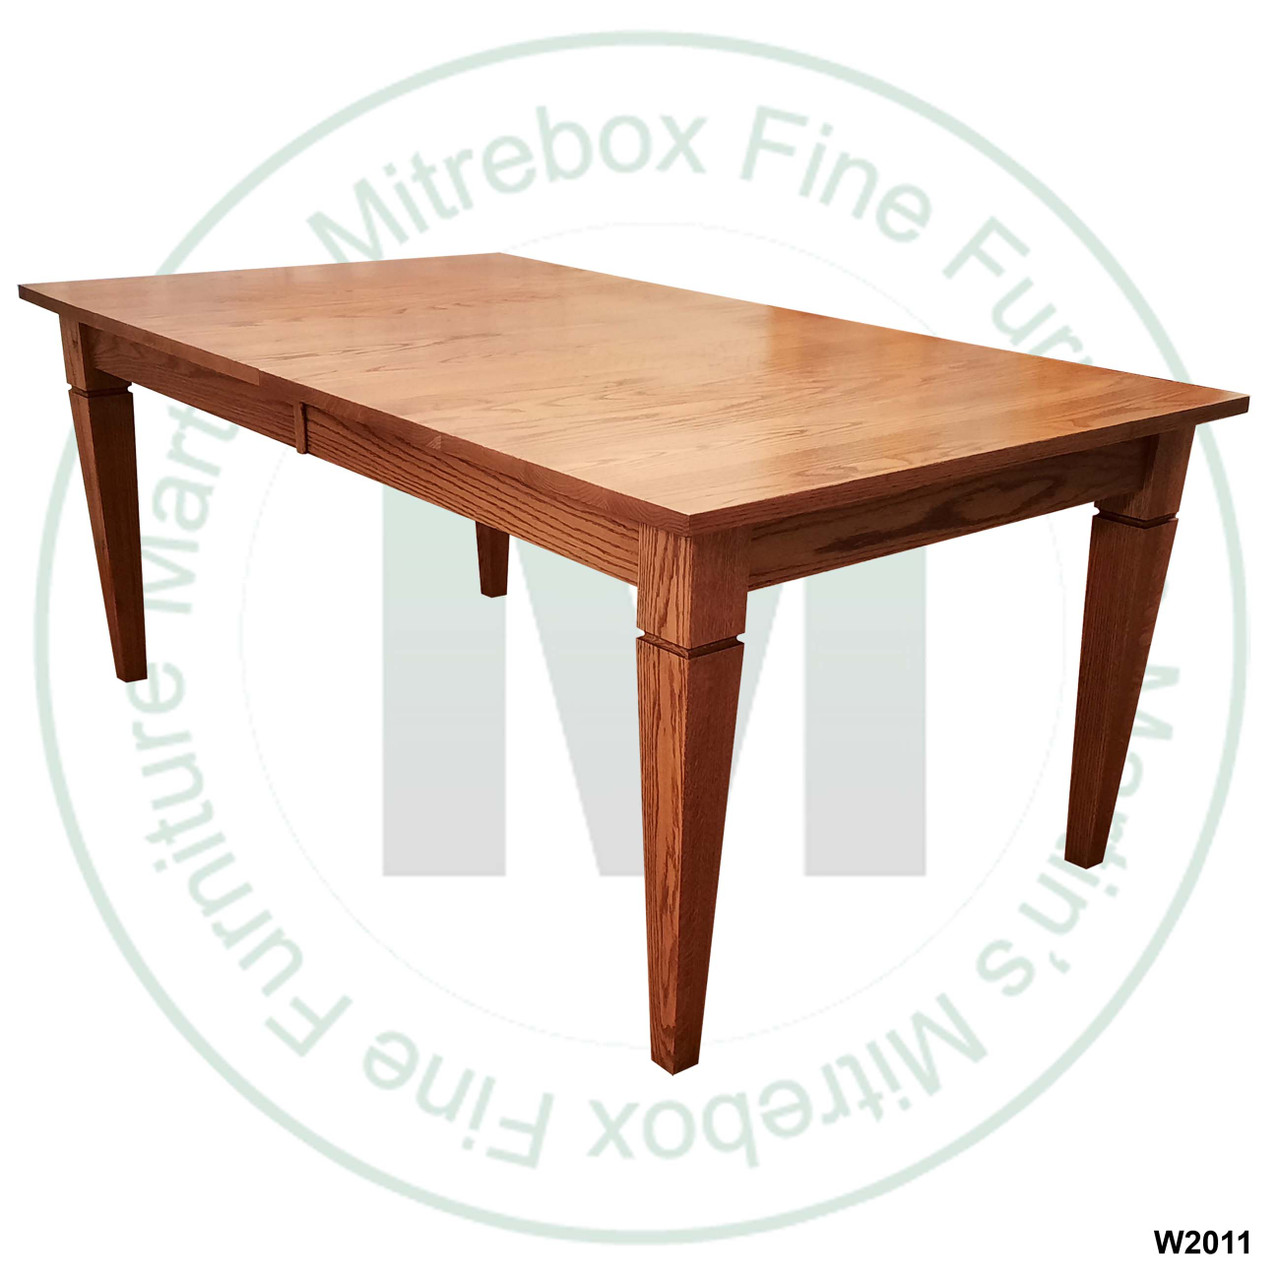 Oak Reesor Solid Top Harvest Table 36''D x 108''W x 30''H Table Has 1 3/4'' Thick Top And 2 - 16'' Extensions